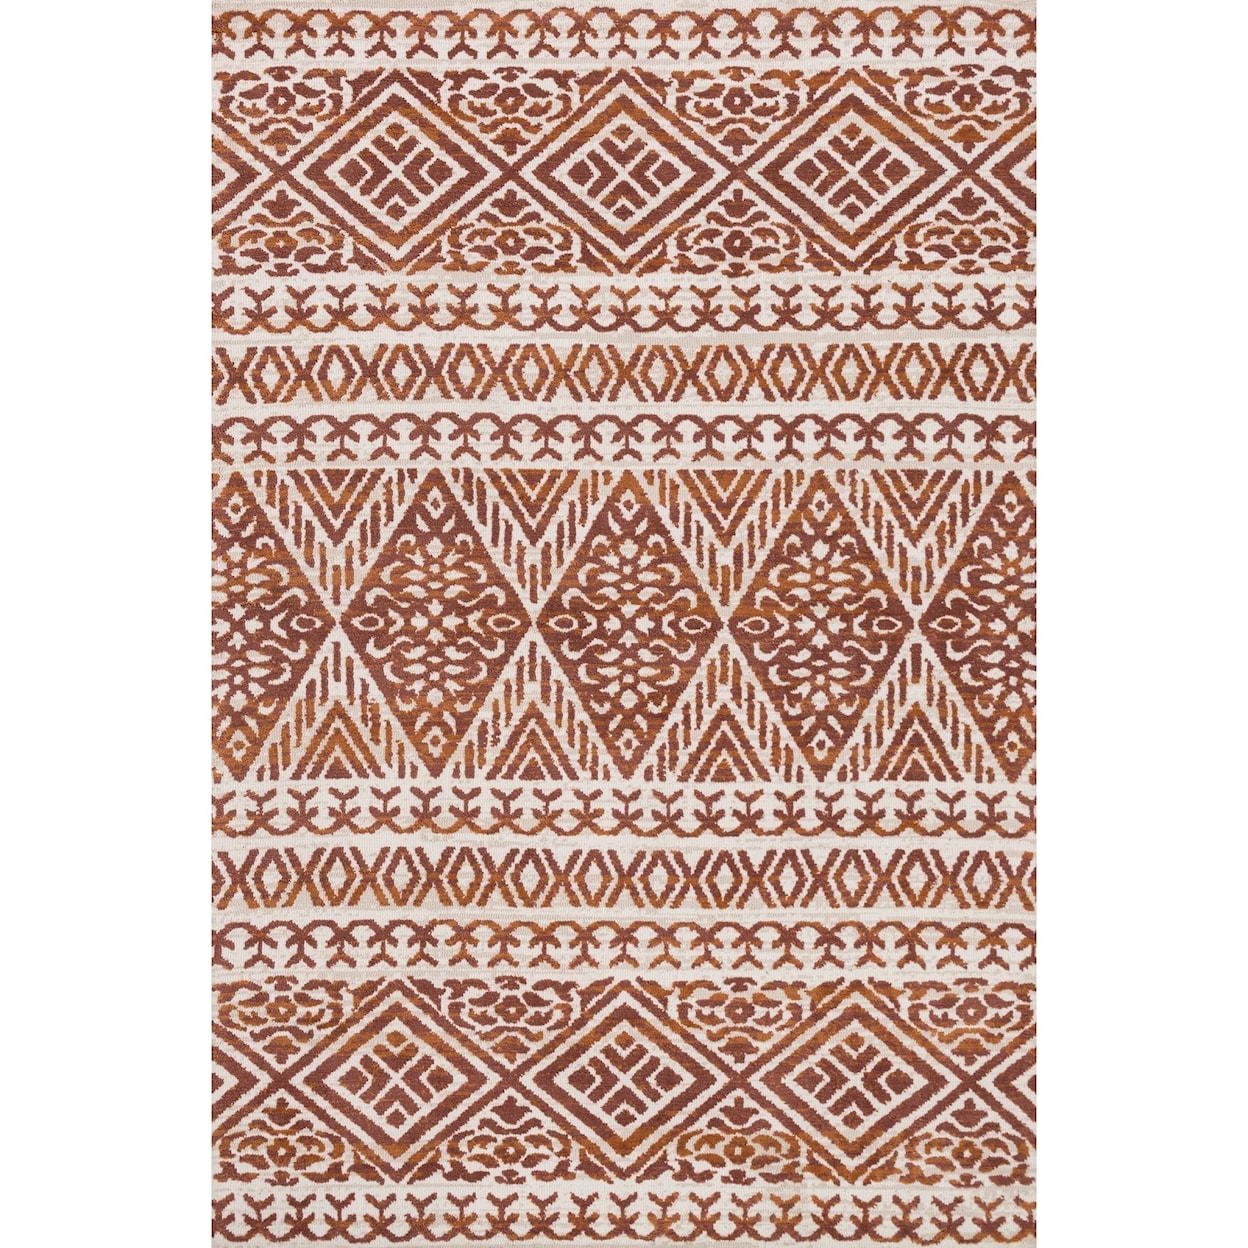 Magnolia Home by Joanna Gaines for Loloi Lotus 2' 6" X 7' 6" Runner Rug